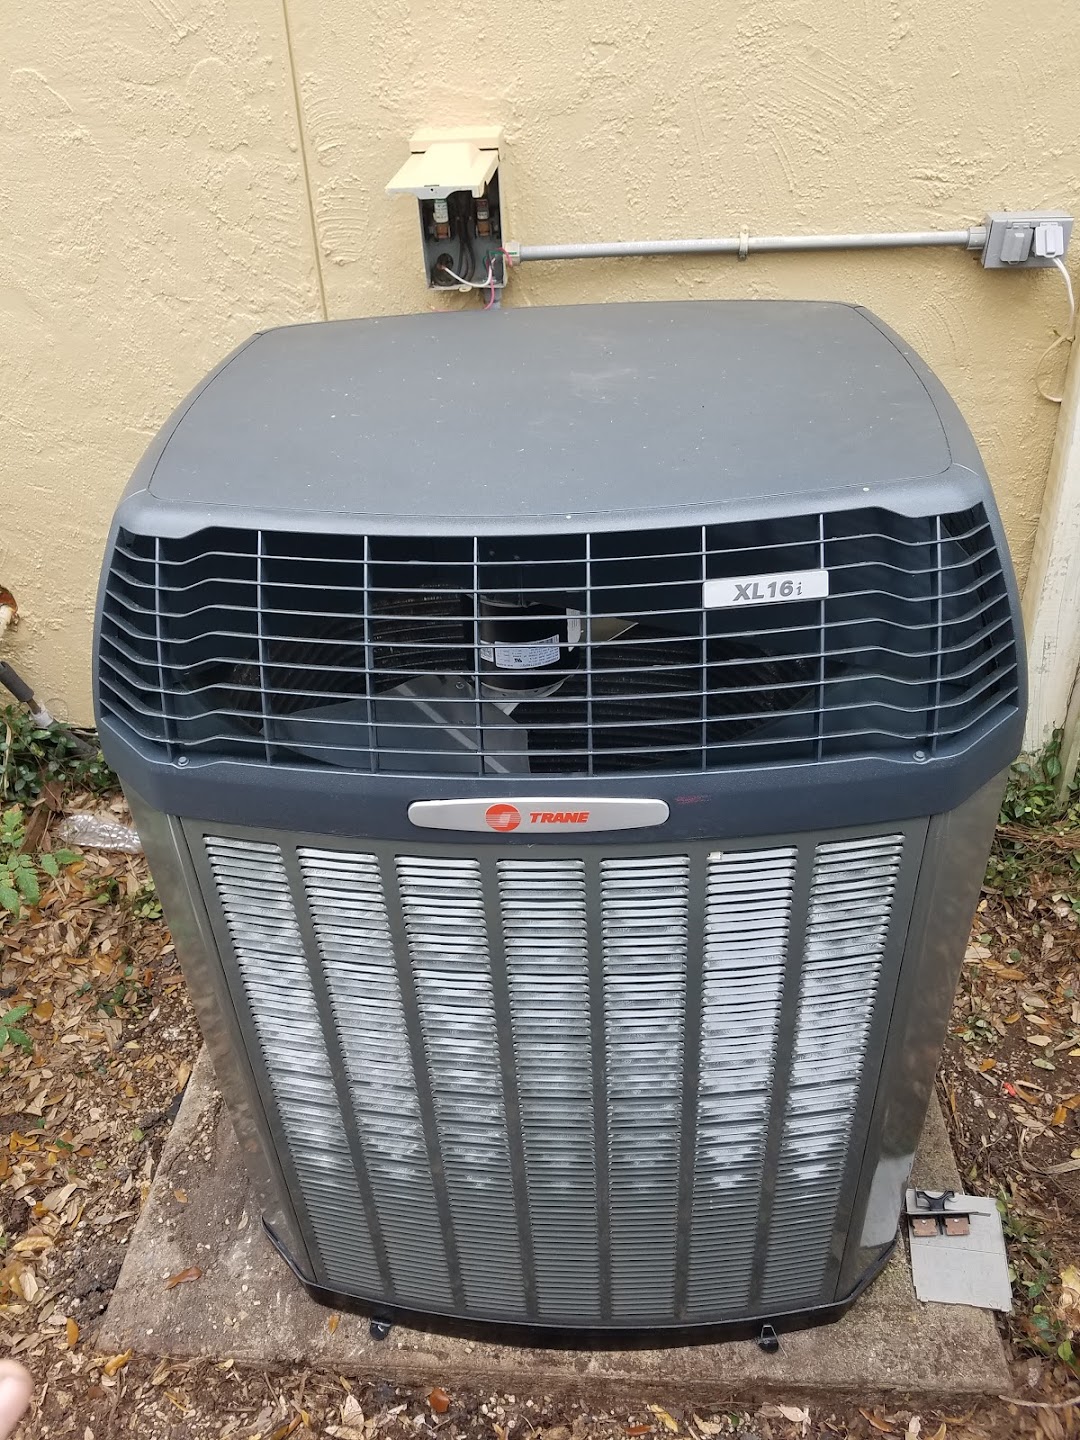 All Seasons Heating & Air Conditioning